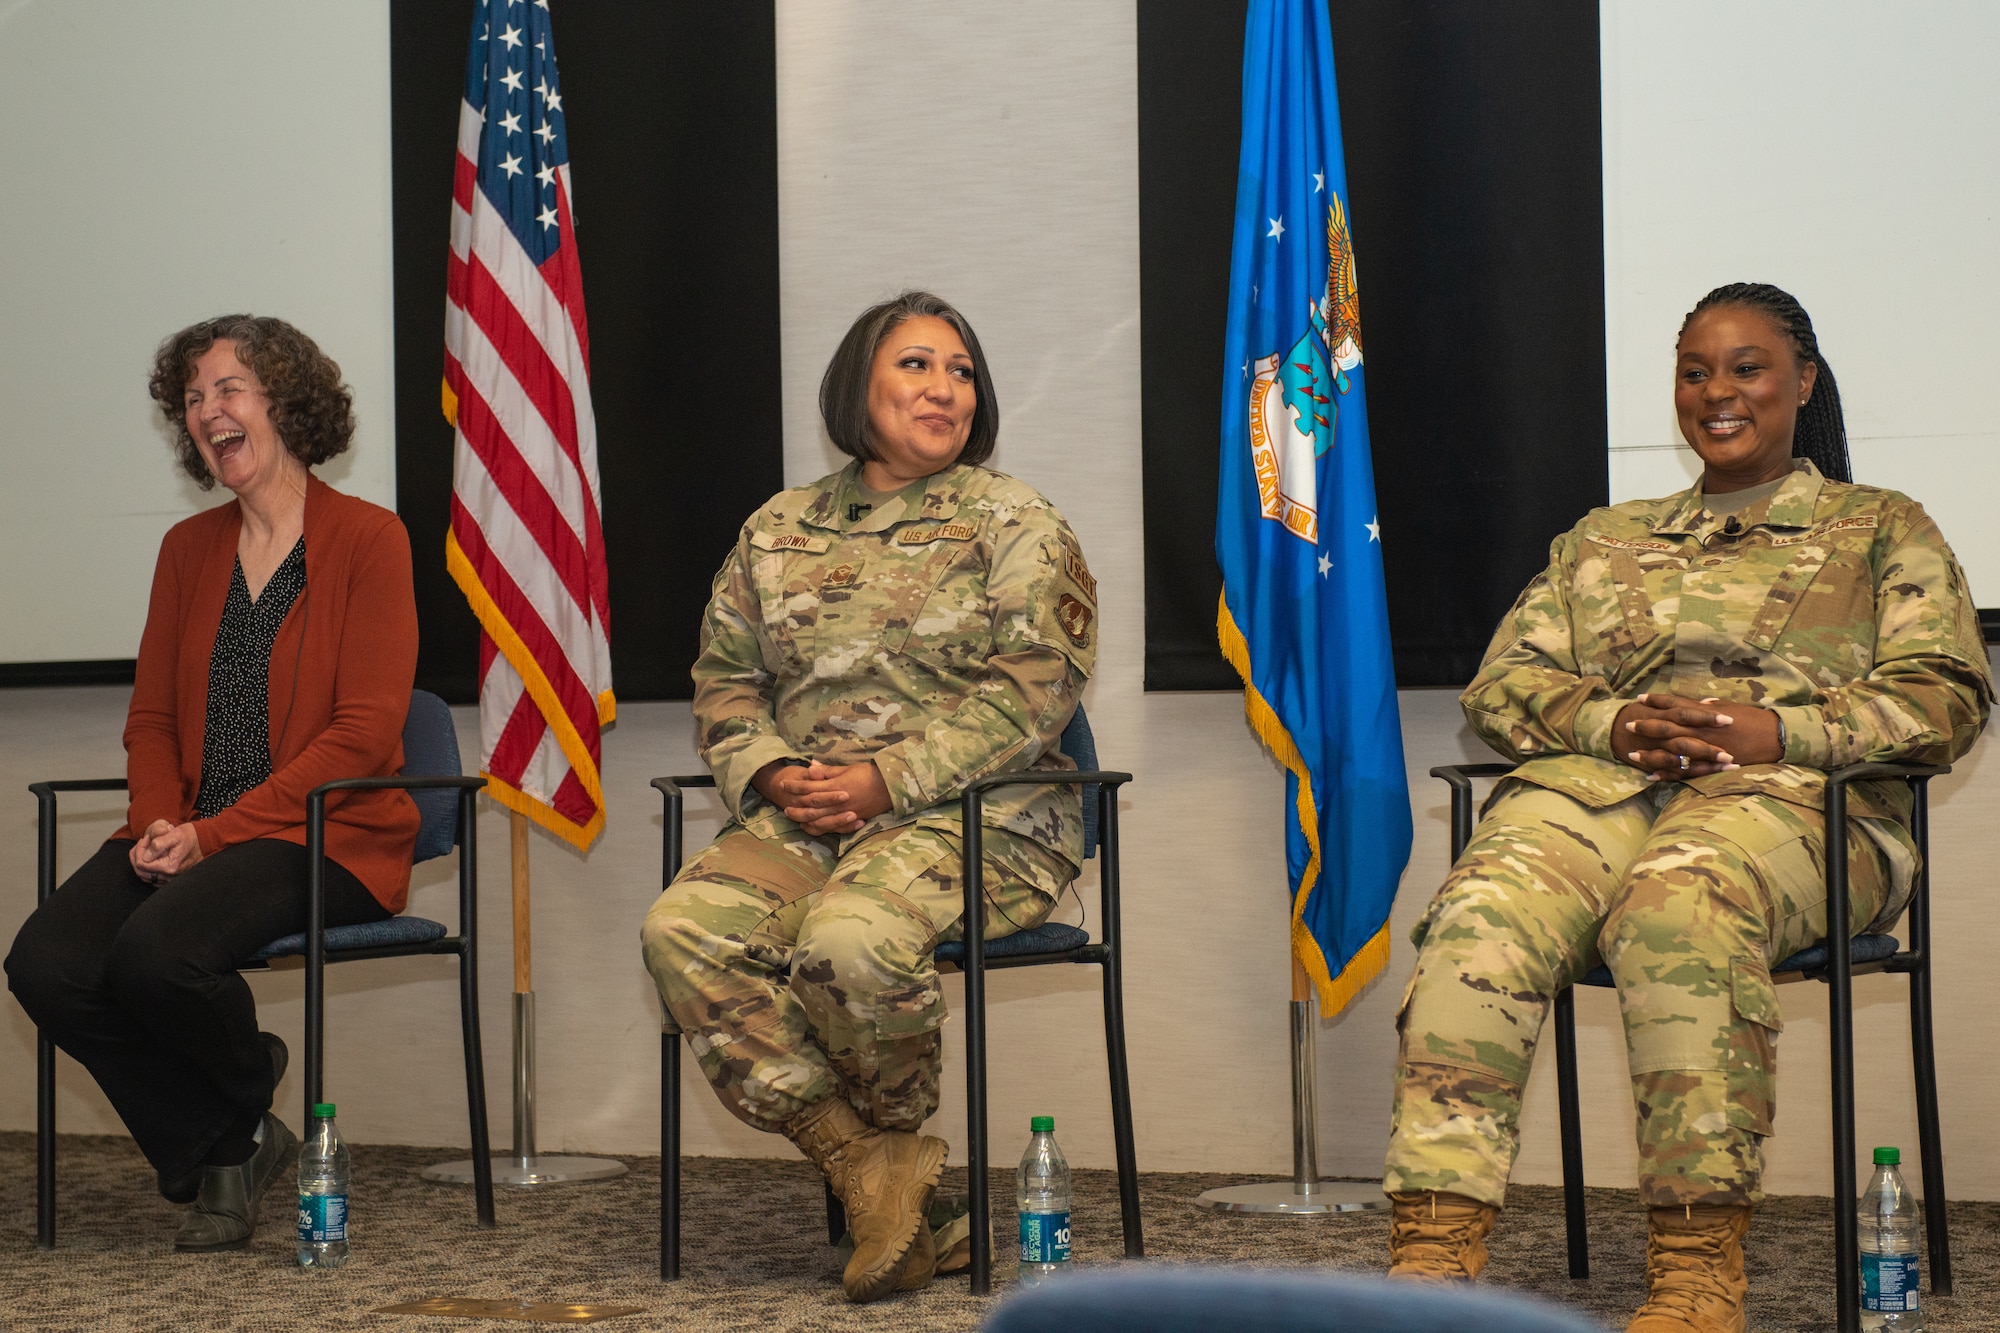 Top women in their respective career fields participated at the Women in Leadership Panel on Edwards Air Force Base, Calif., March 31. (Air Force photo by Madeline Guadarrama)